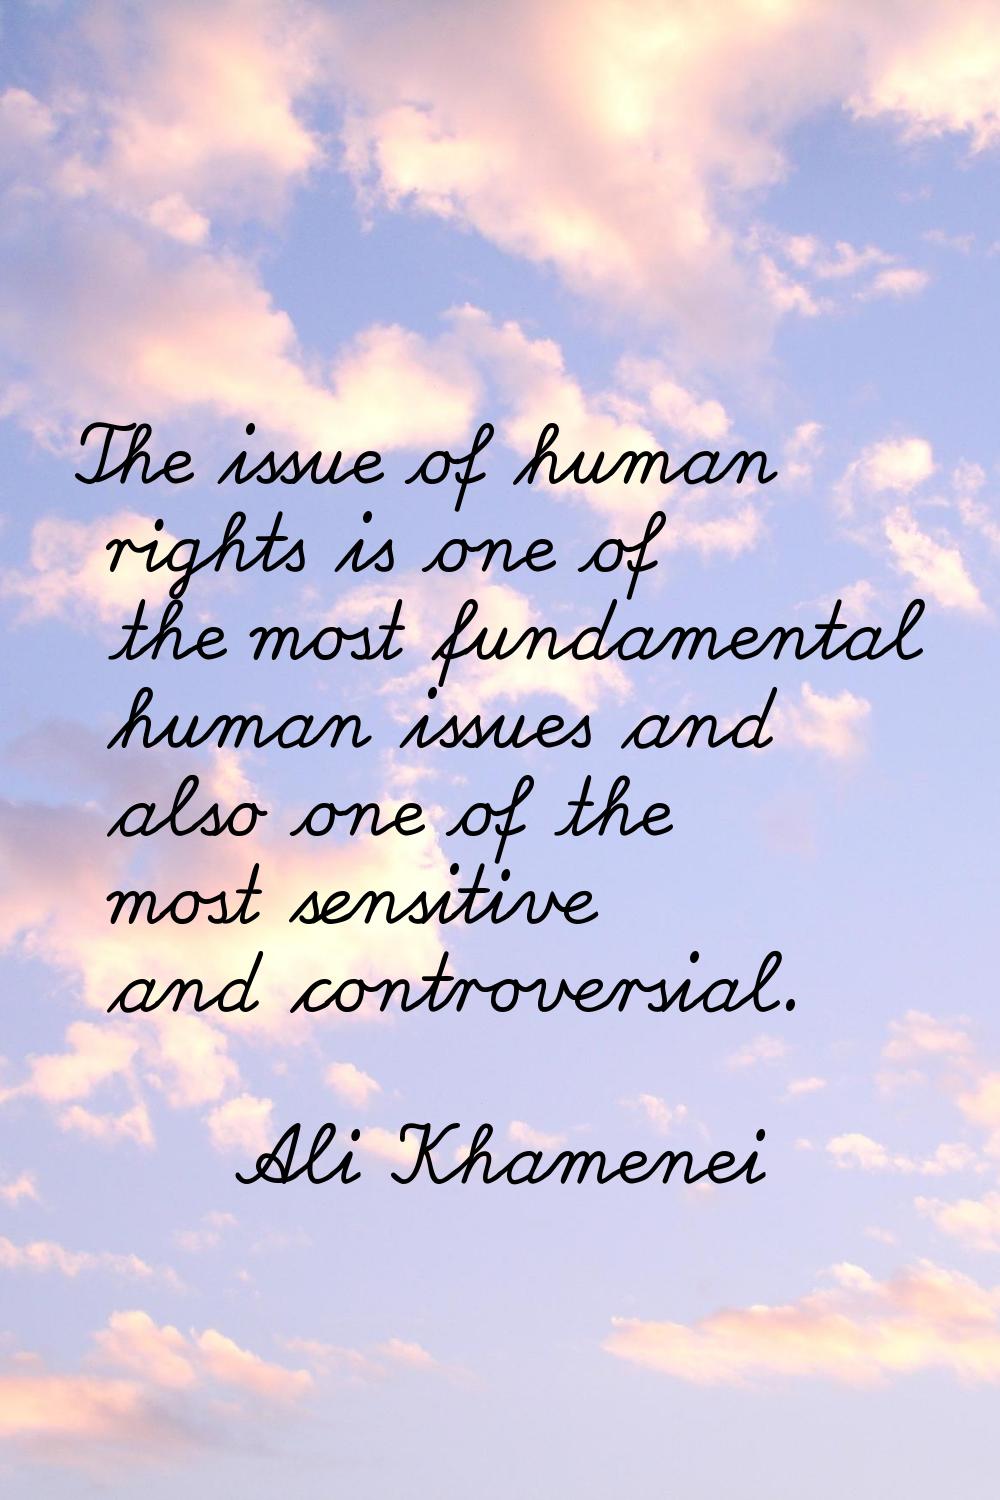 The issue of human rights is one of the most fundamental human issues and also one of the most sens